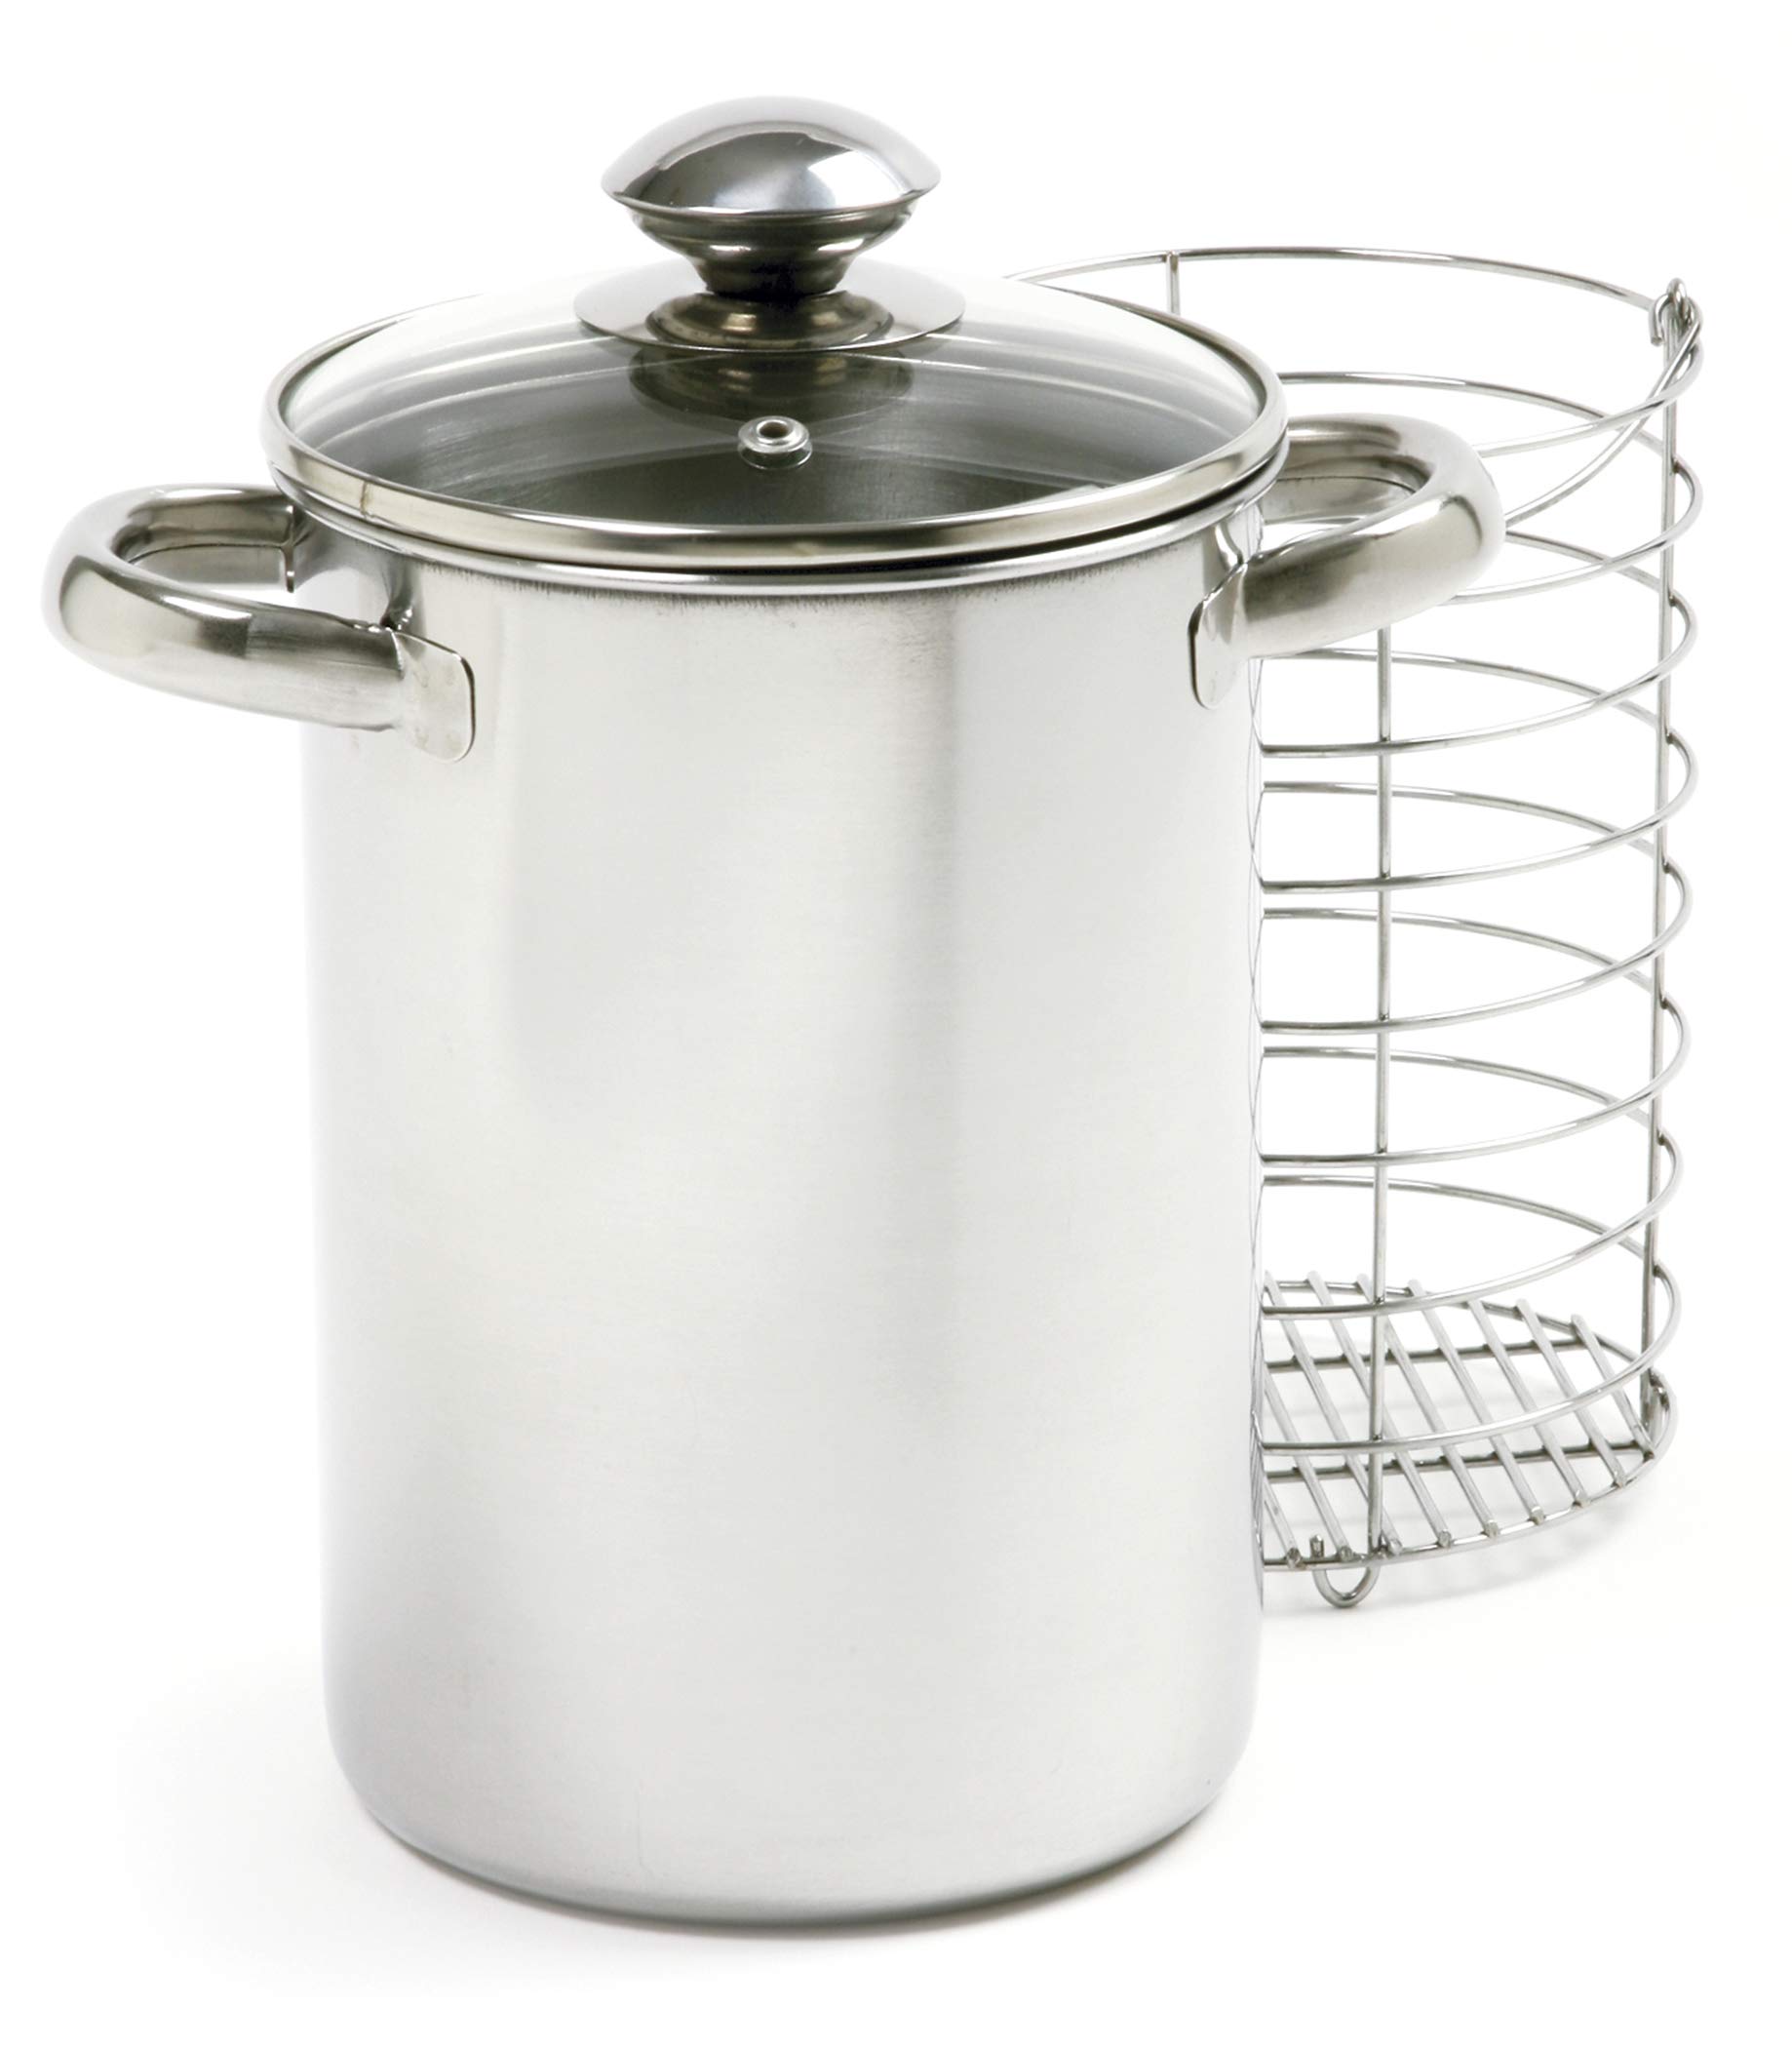 Norpro 573 Stainless Steel Vertical Cooker/Steamer, 3 Piece Set, 10in/25.5cm, as shown